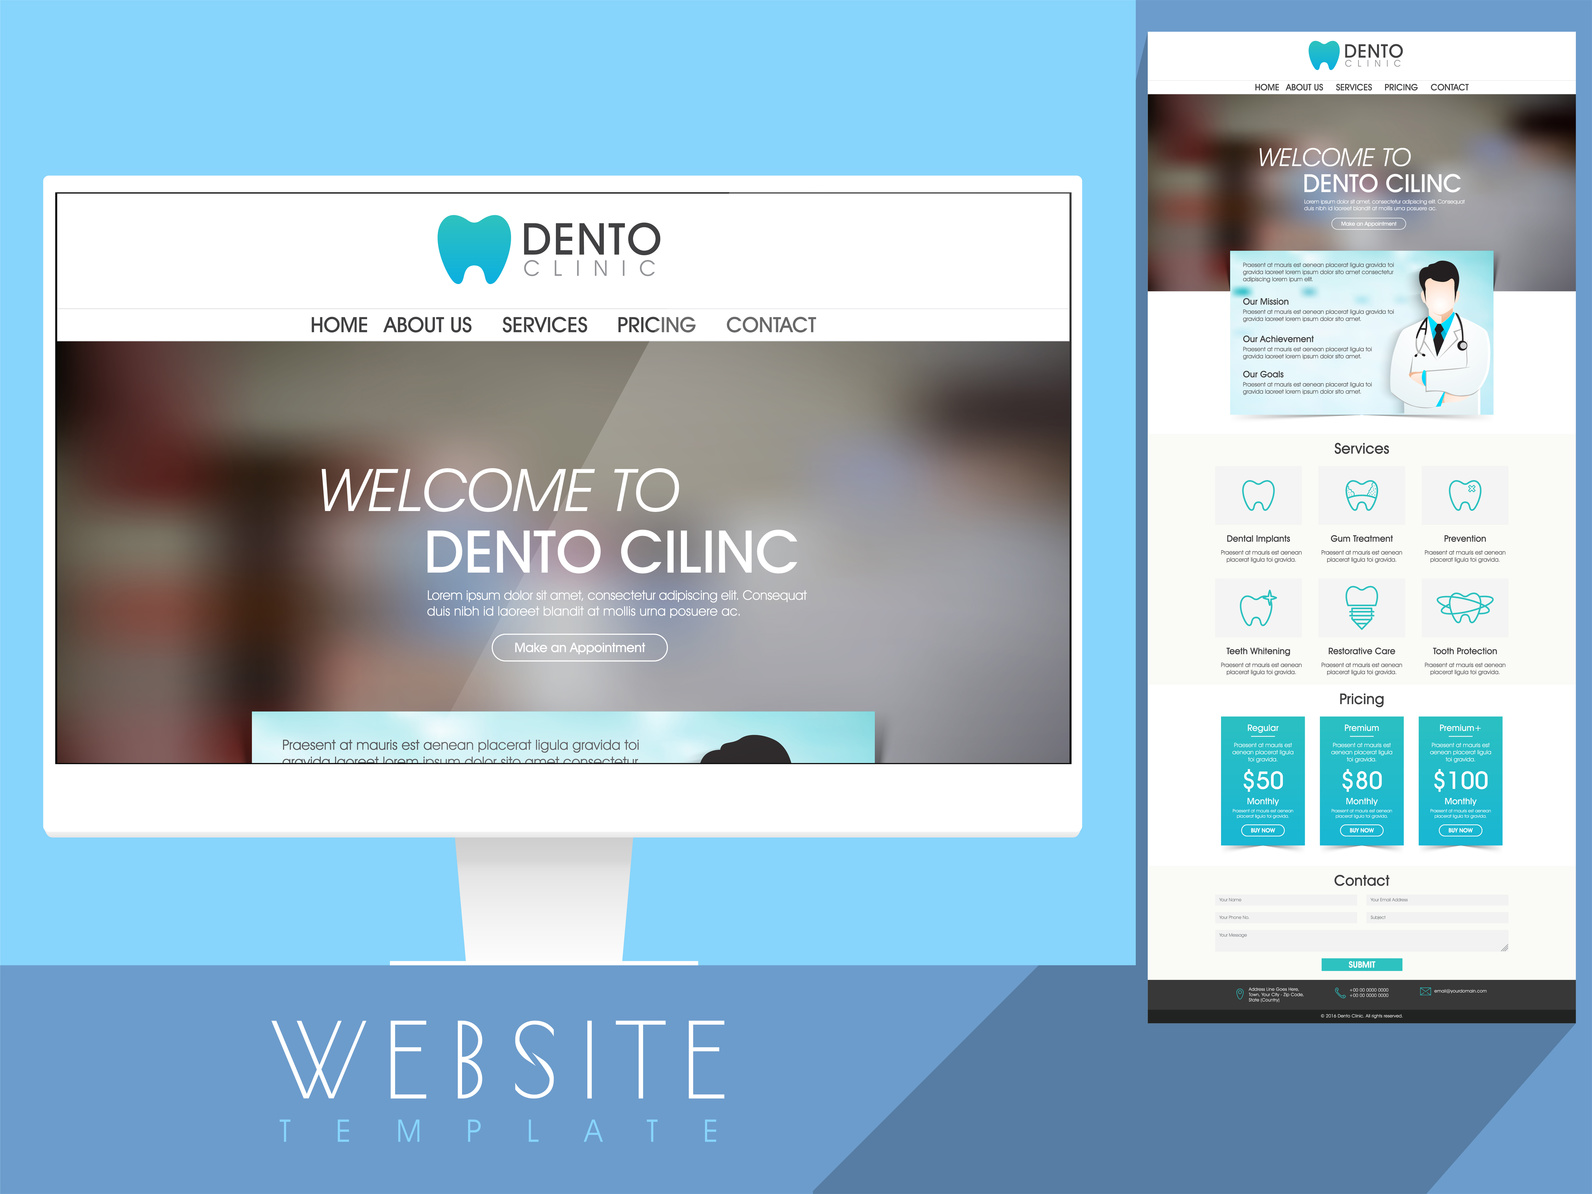 Dento Clinic Website Template design with services, pricing and contact details information.